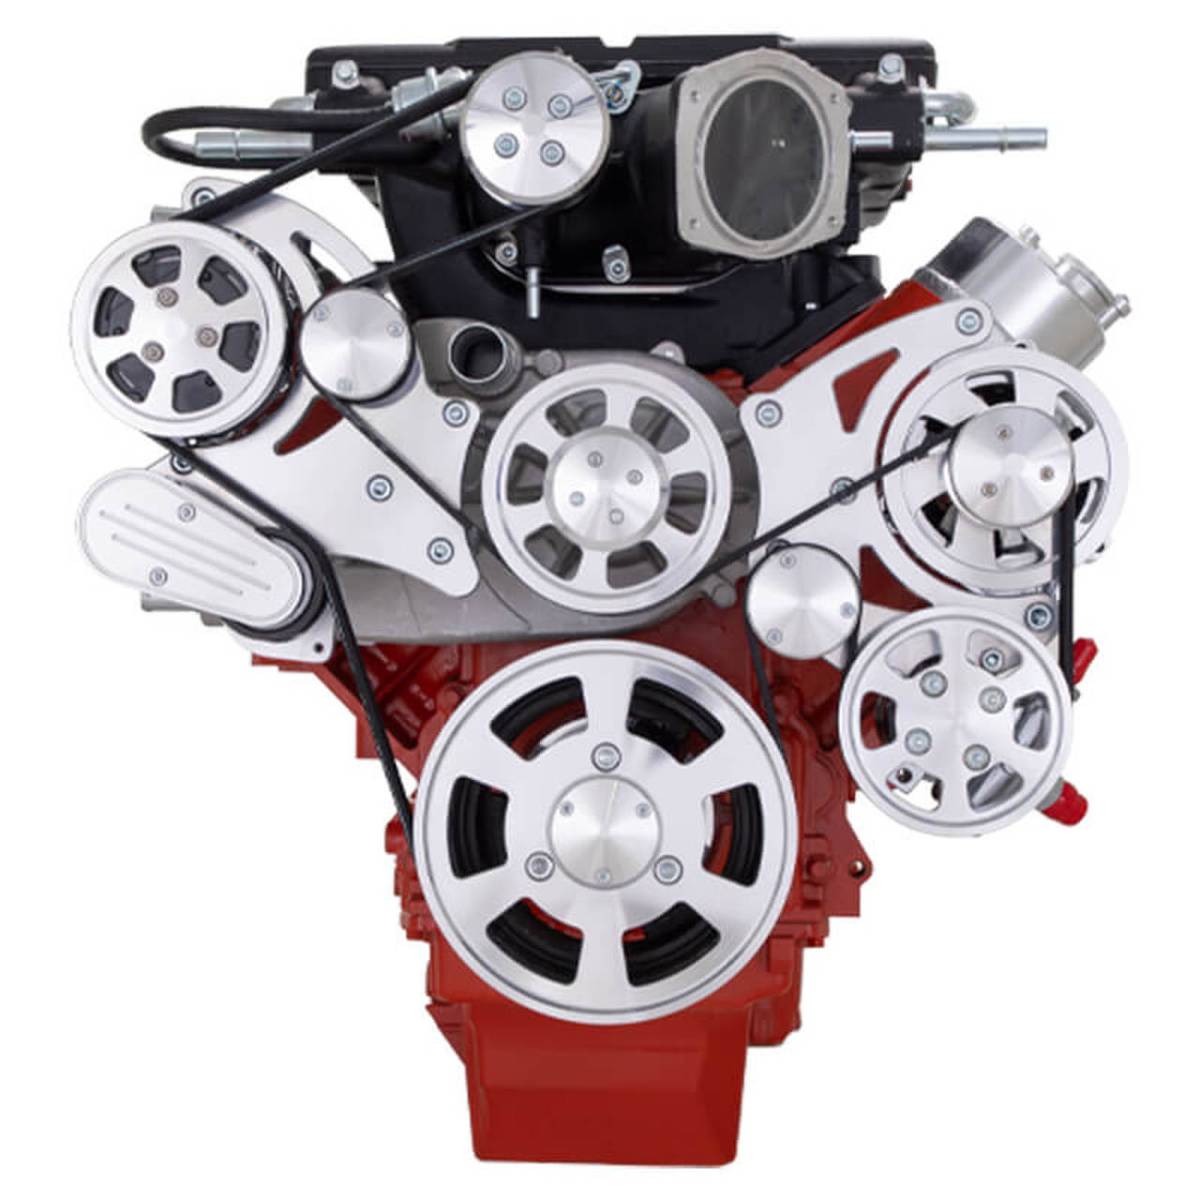 CVF Racing - CVF Wraptor Chevy LS Engine Whipple 2.3L or 2.9L Serpentine Bracket System with Alternator & PS - Polished - Image 1